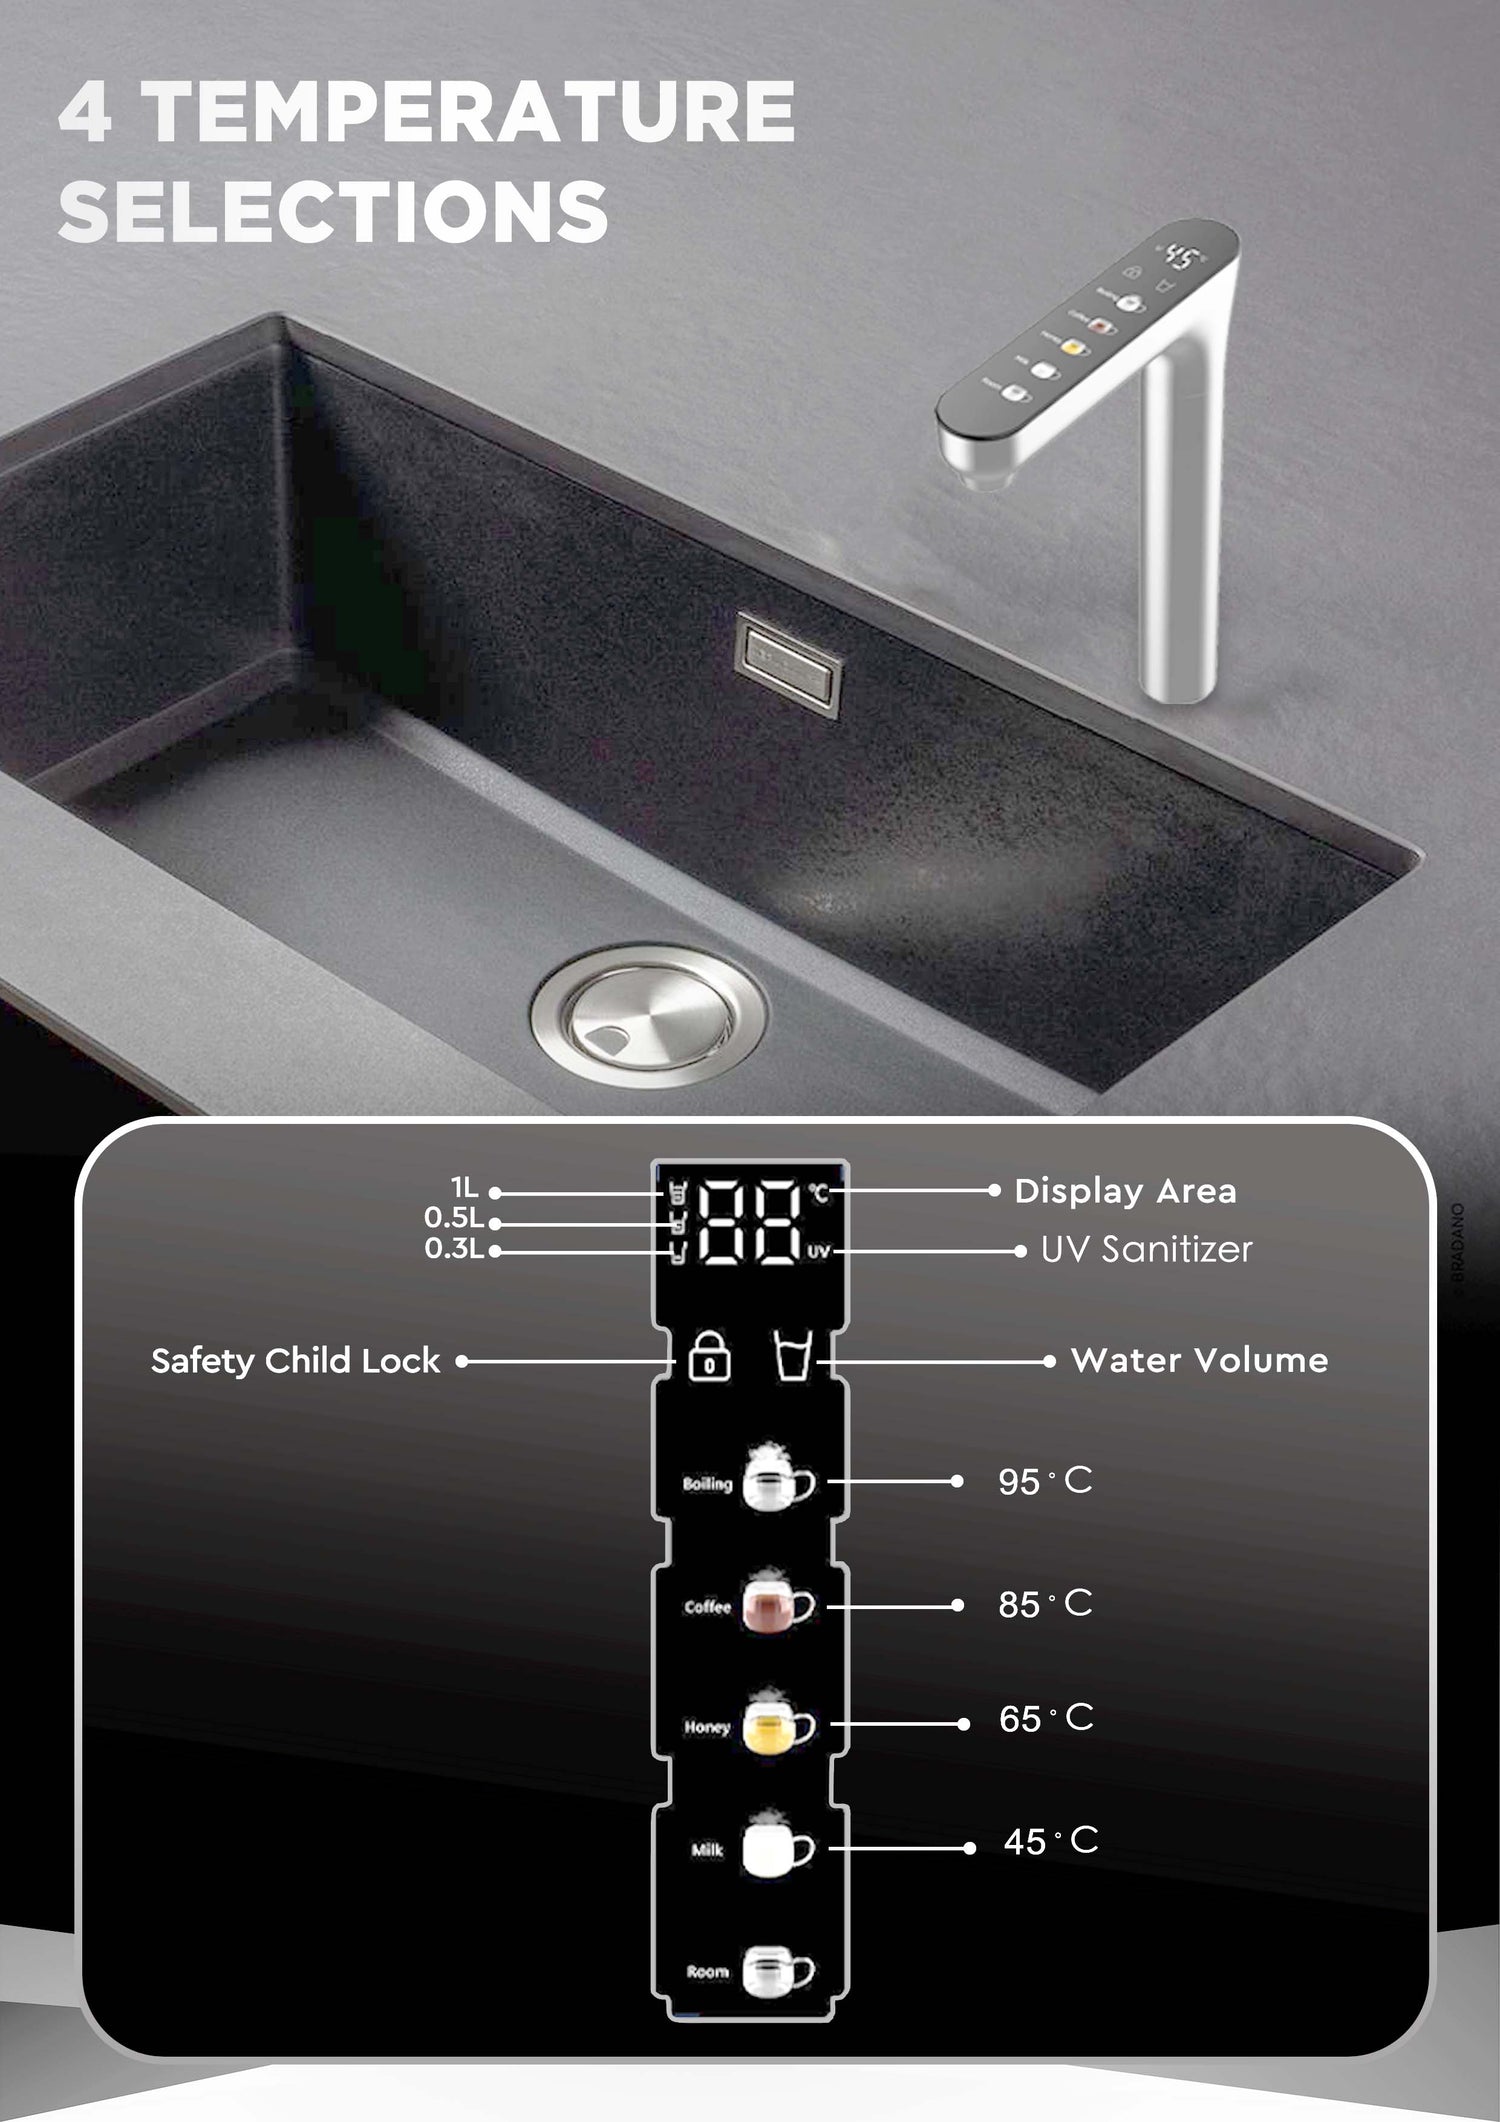 Real Instant Hot Tap | Experience the Ease of Modern Living: One-Touch Instant Hot Water at Your Fingertips! *FREE Installation